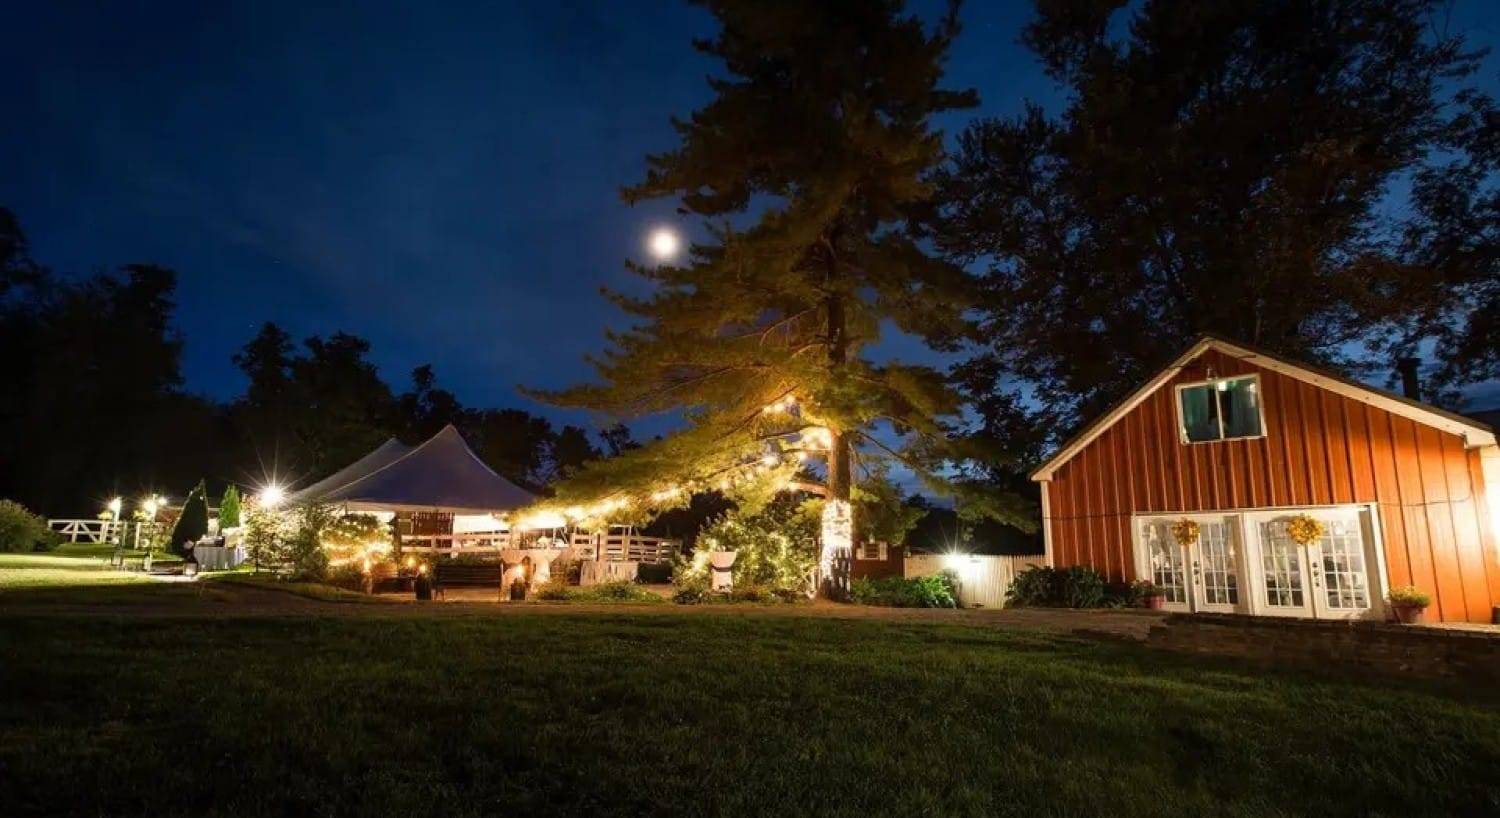 An outdoor tented reception area lit up at night with a bright moon in the sky